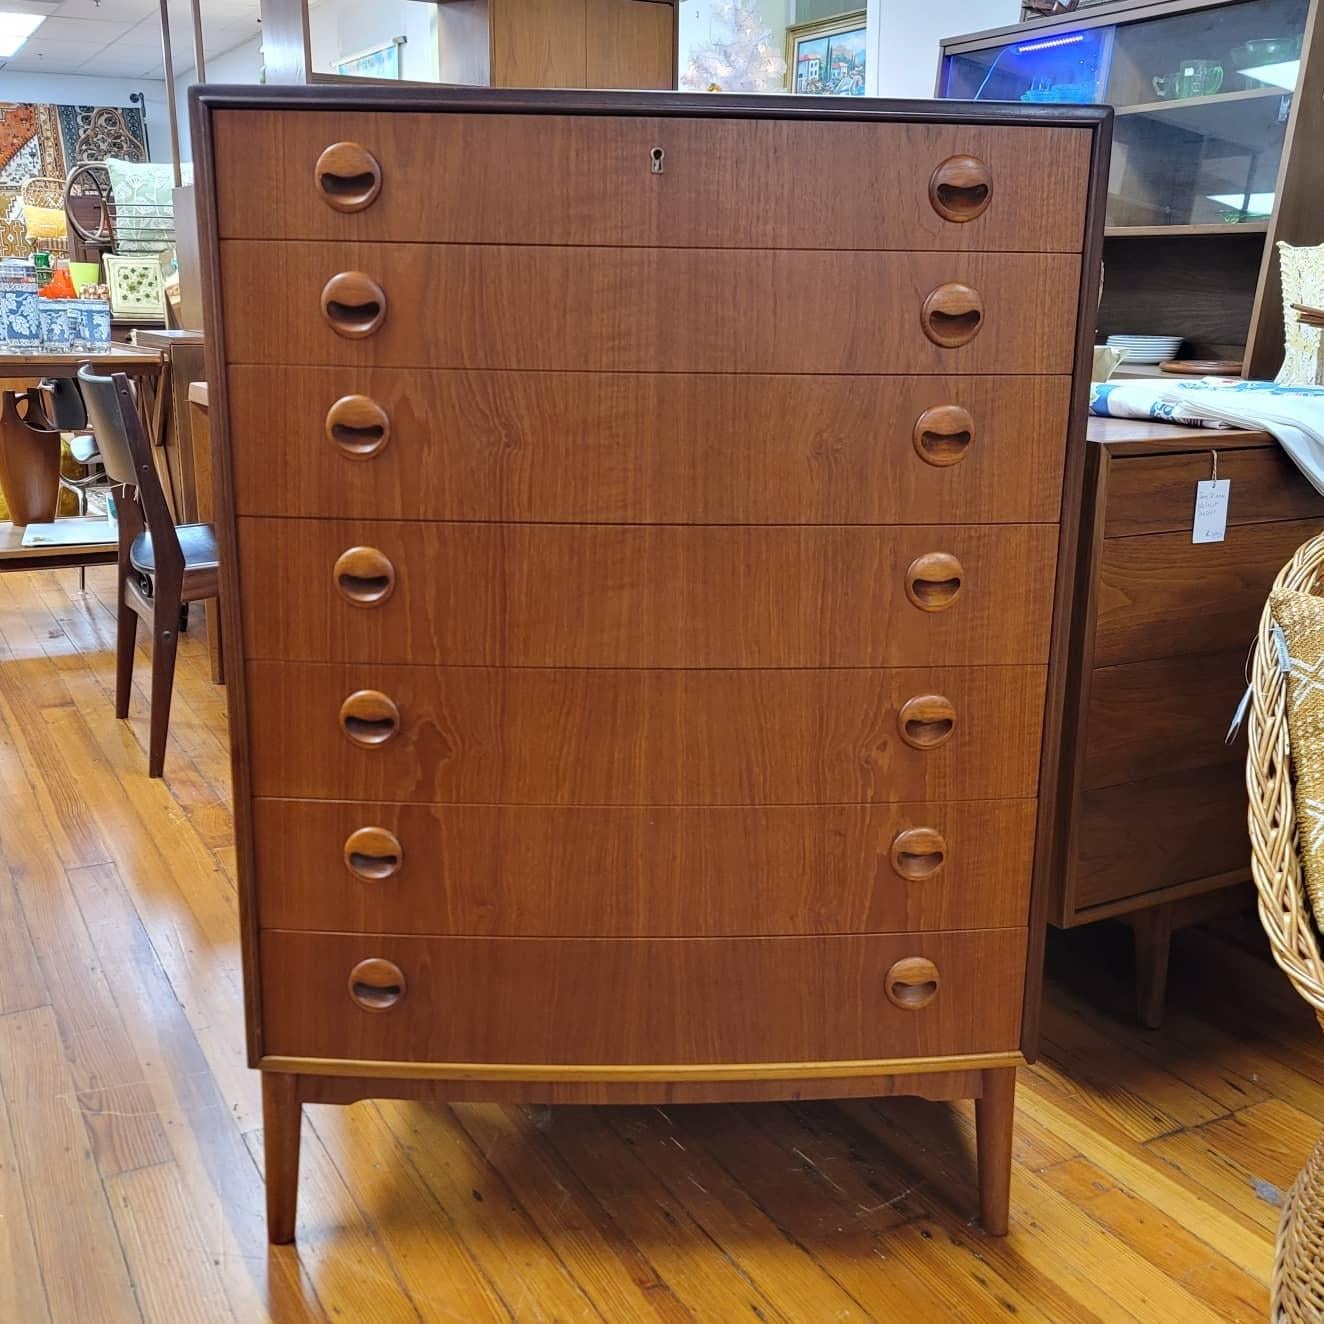 This seven drawer teak tall chested was designed by Kai Kristiansen with its distinct eyelash pulls and curved front. This piece was recently imported from Denmark and has been professionally restored and is in excellent condition. Perfectly sized